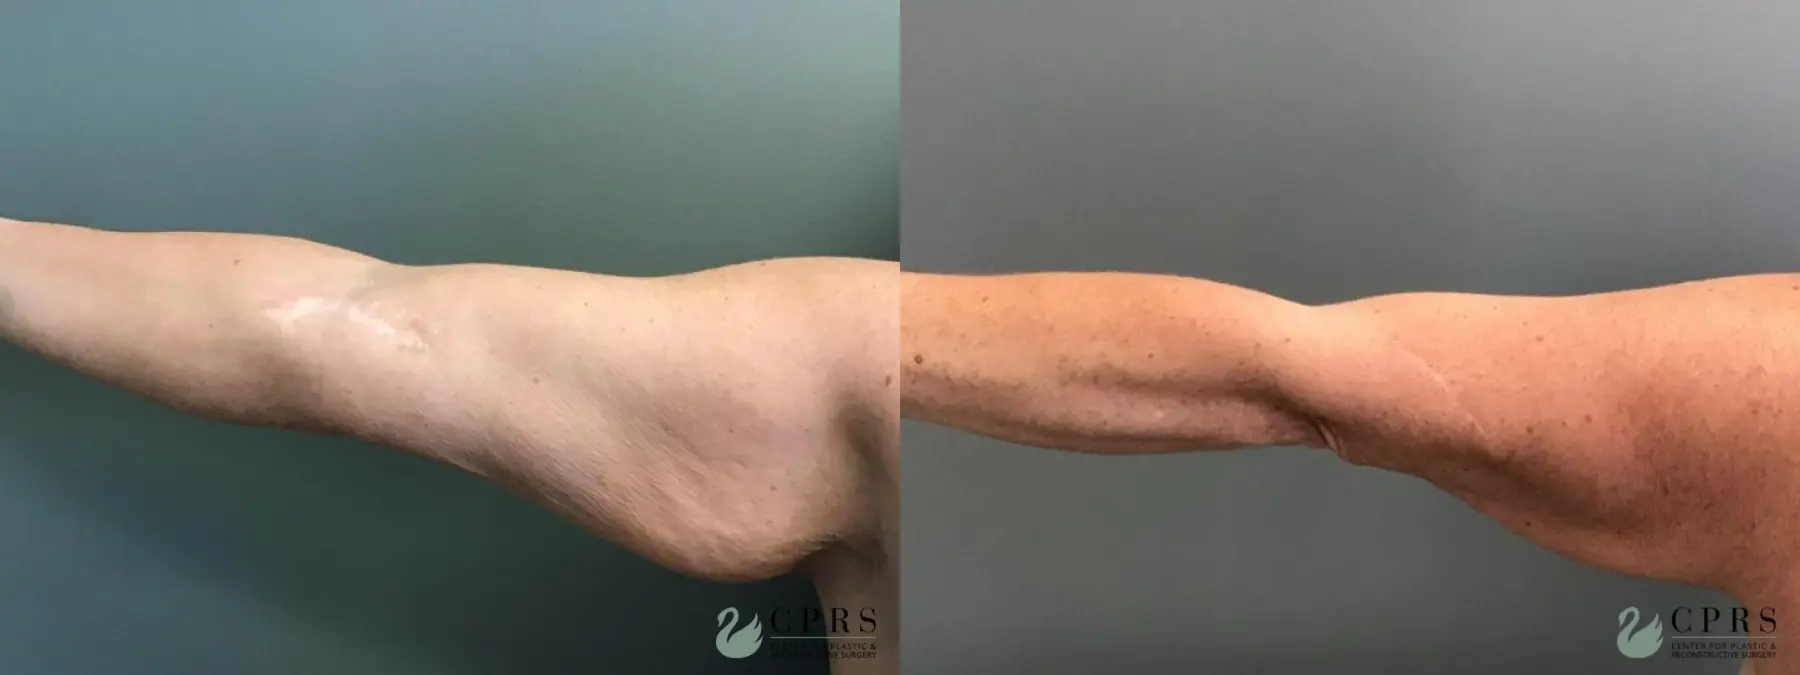 Brachioplasty: Patient 2 - Before and After  